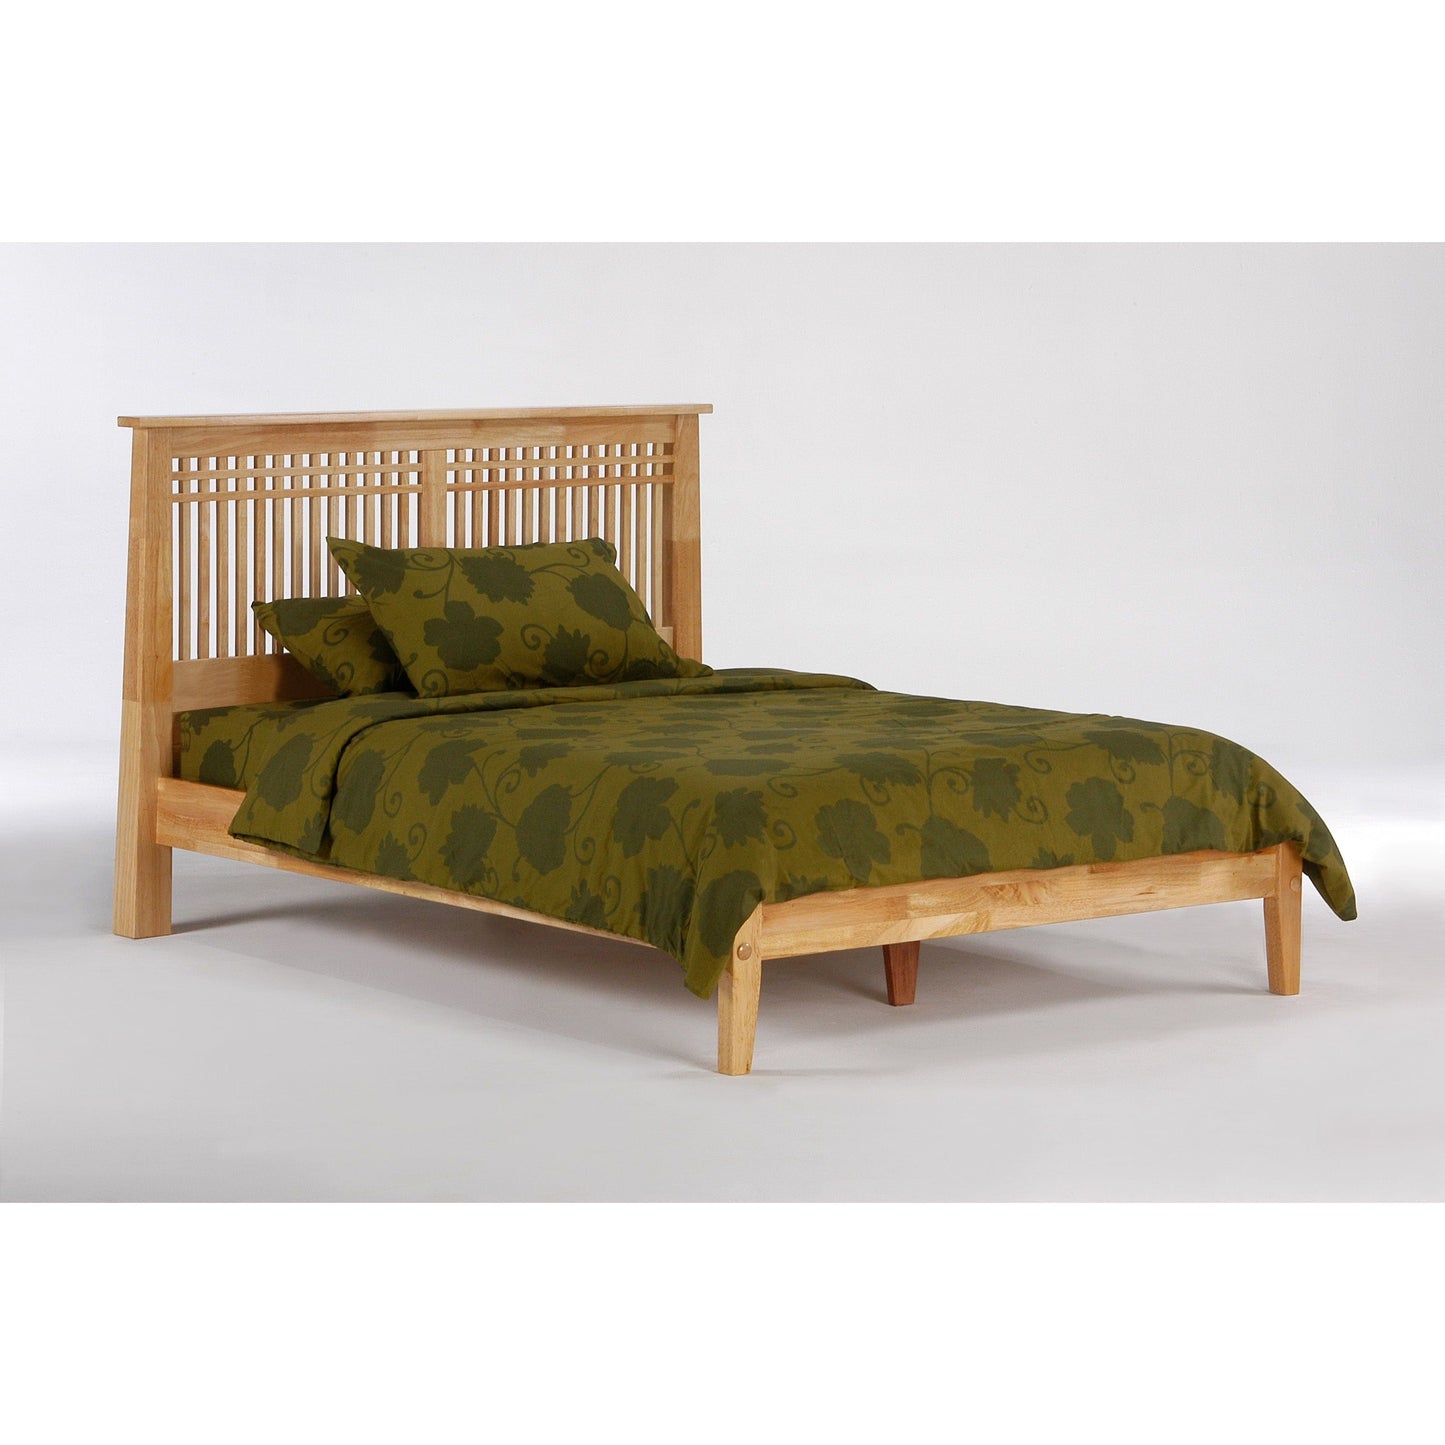 Night And Day Full Solstice Bed in cherry finish (P Series) SOL-PH-FUL-CH-COM